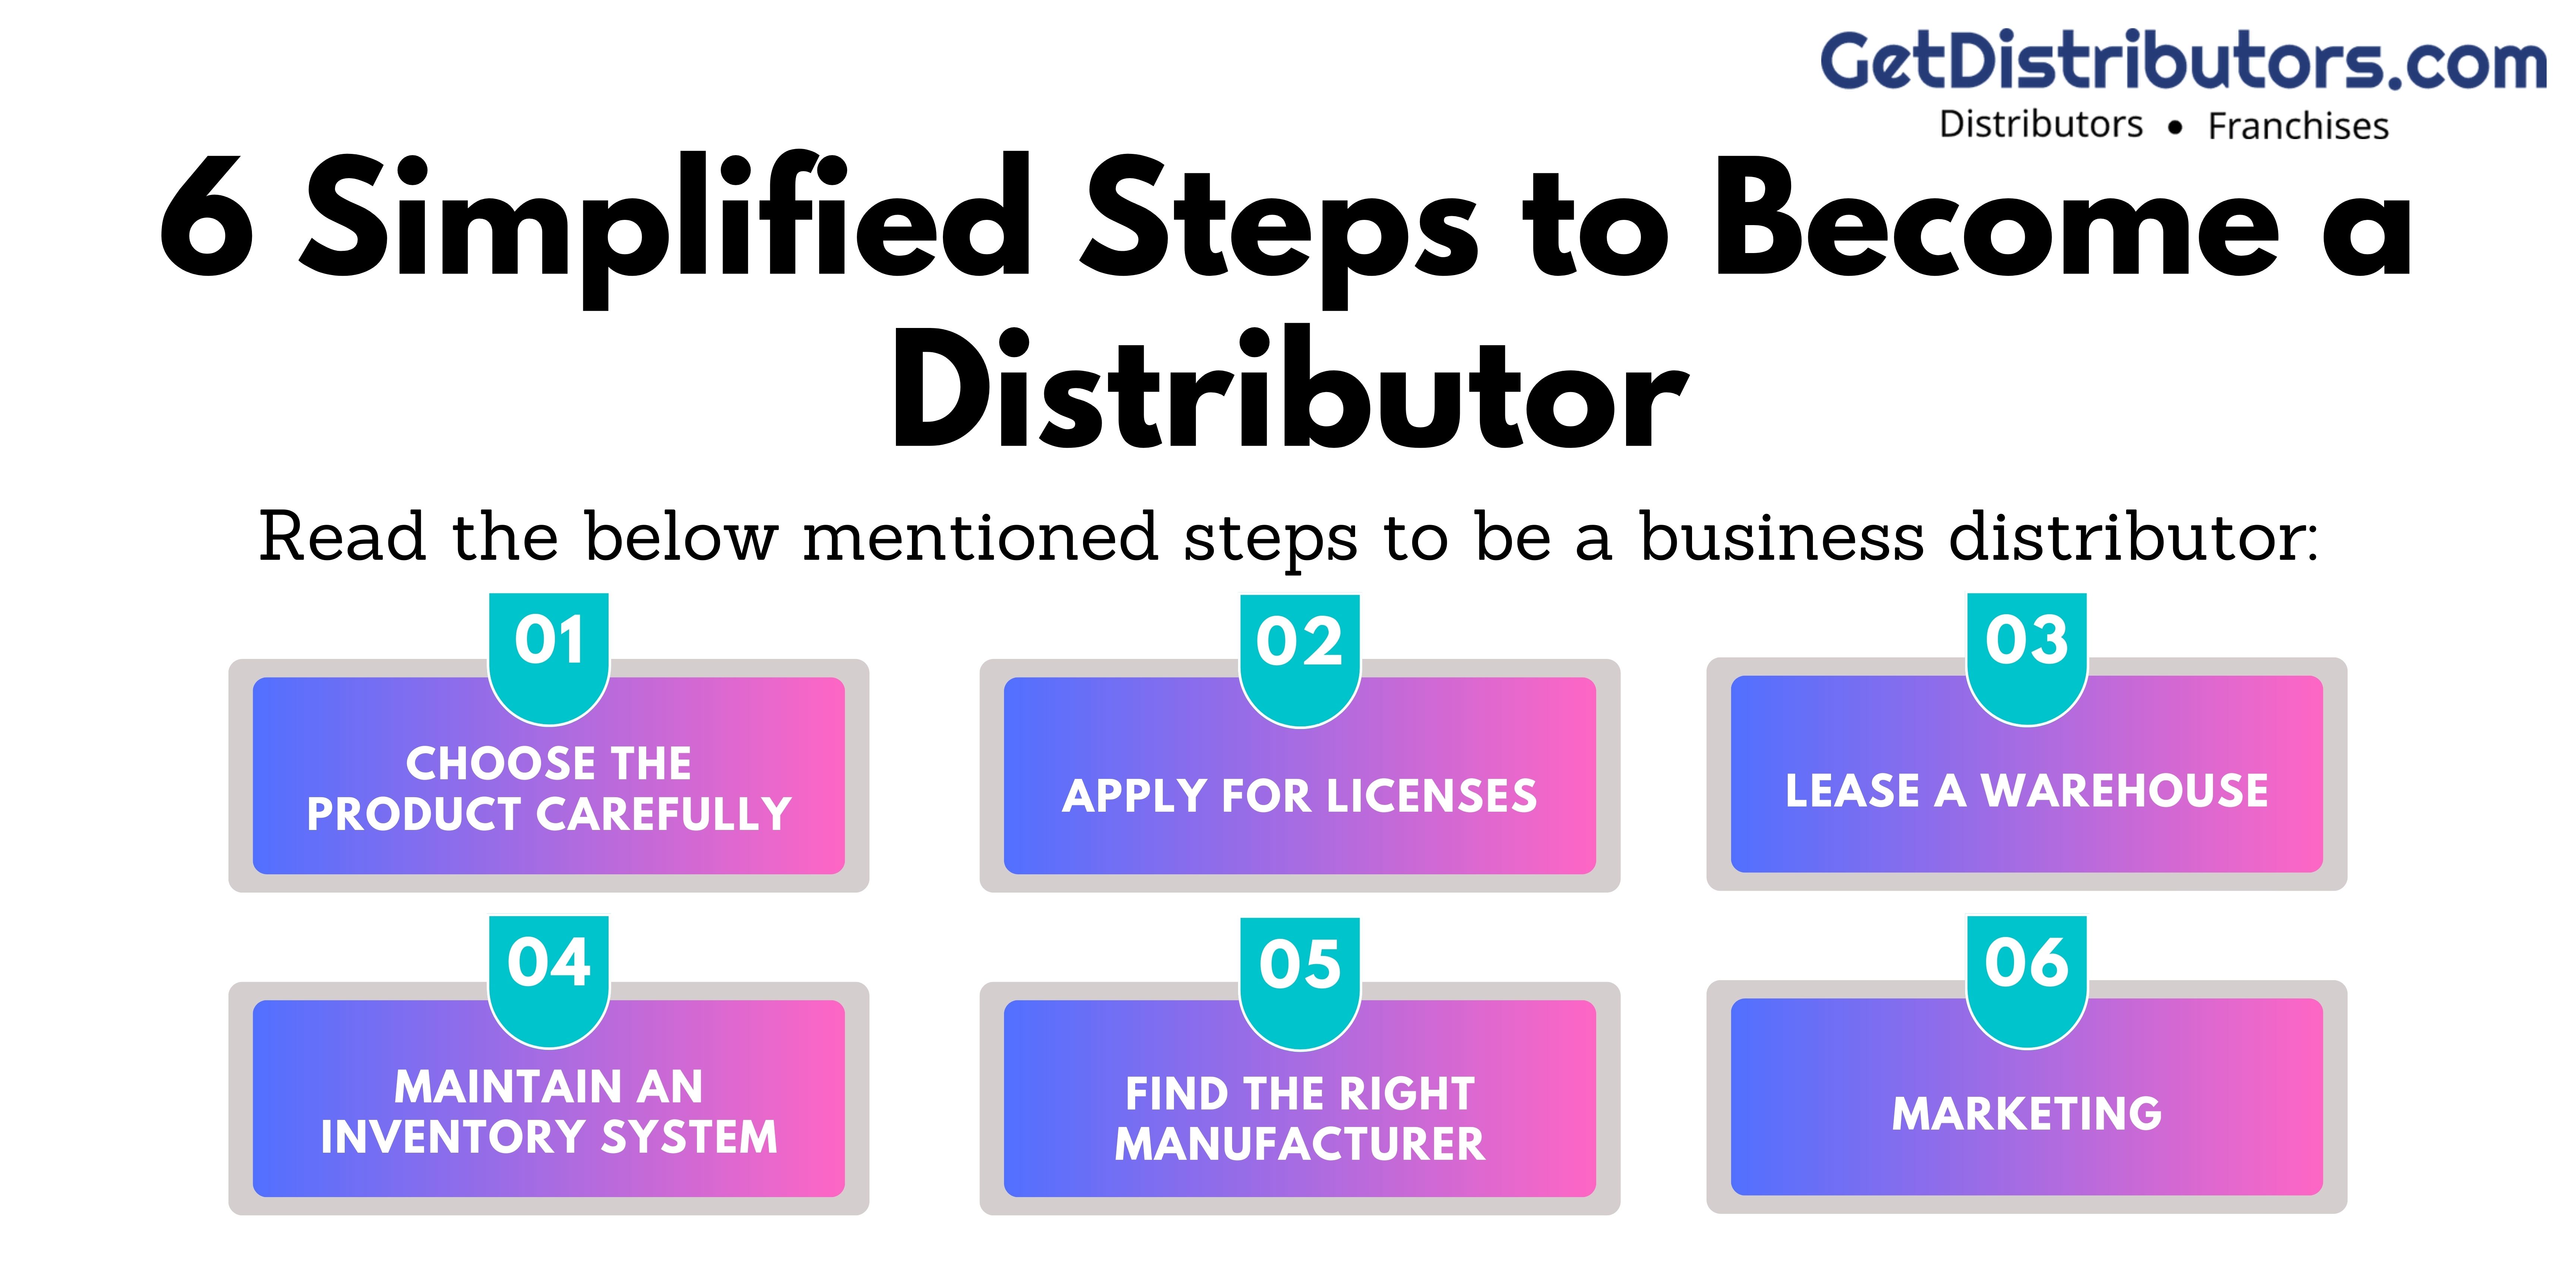 6 Simplified Steps to Become a Distributor